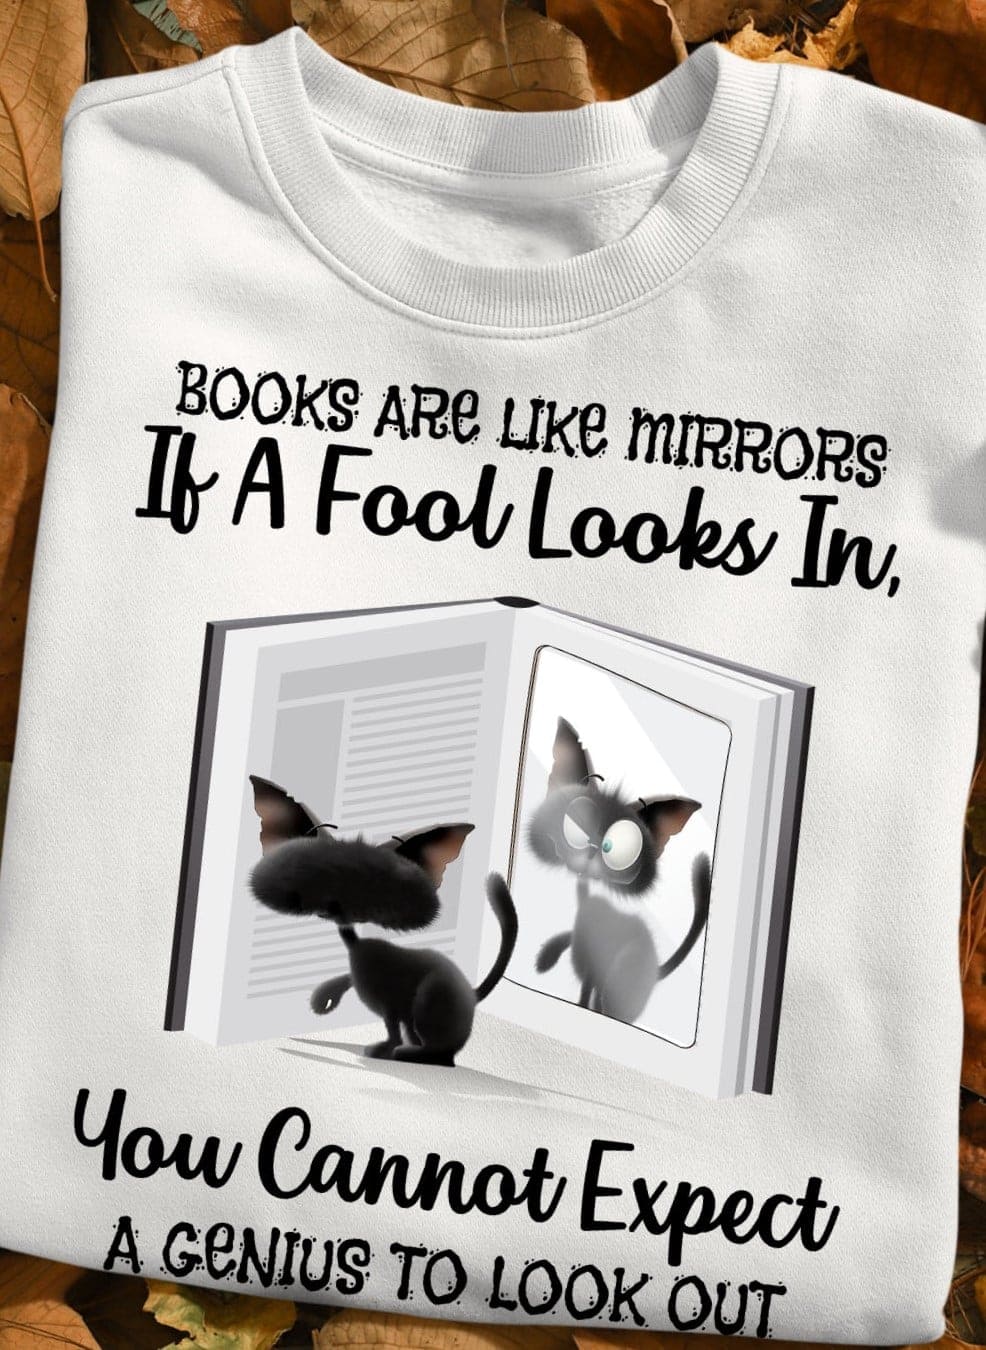 Black Cat Mirror Book - Books are like mirrors if a fool looks in you cannot expect a genius to look out